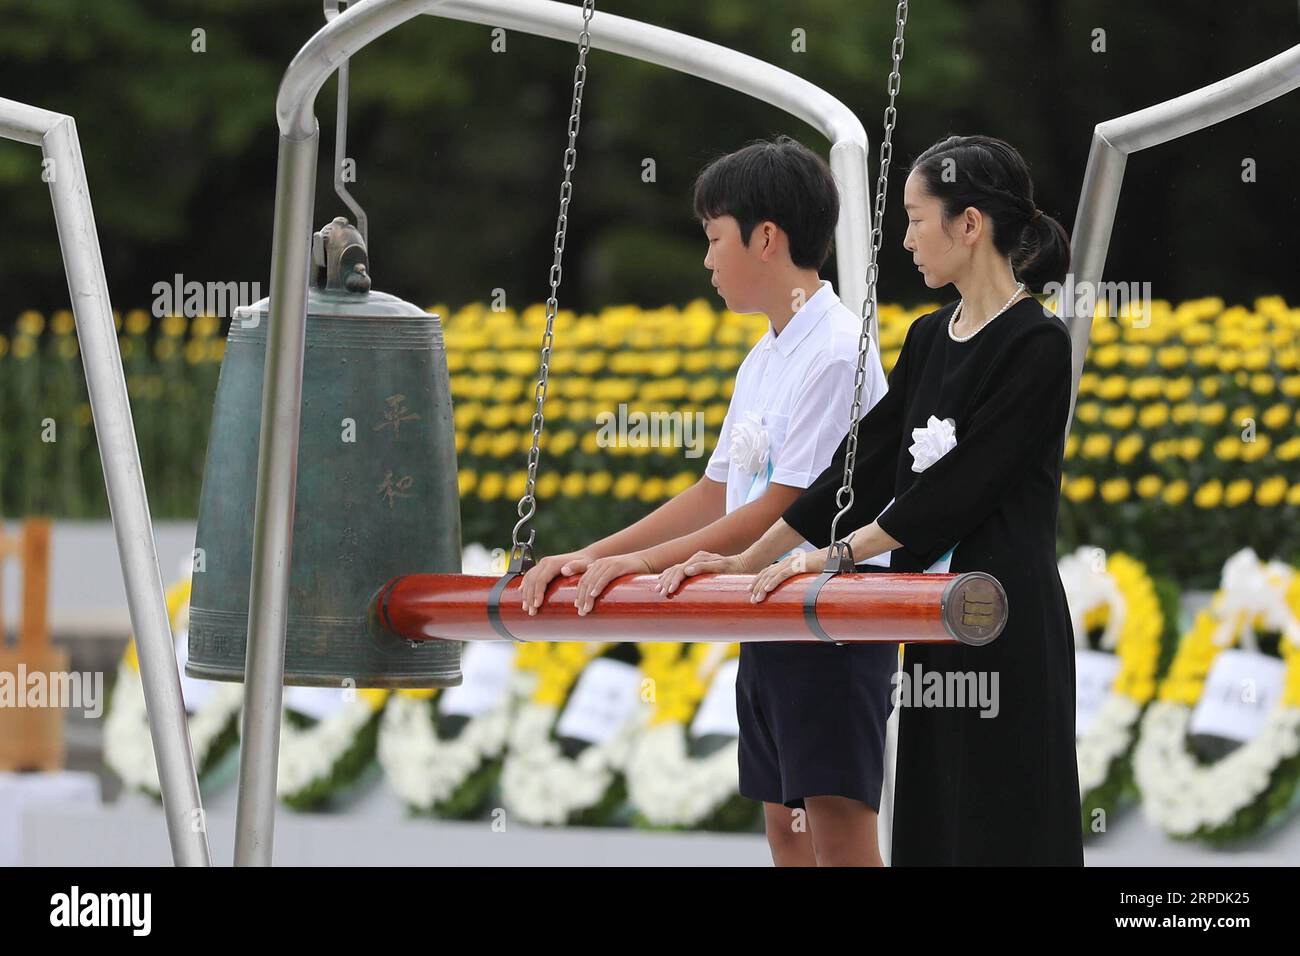 News Bilder des Tages (190806) -- HIROSHIMA, Aug. 6, 2019 -- People attend an annual memorial ceremony in Hiroshima, Japan, Aug. 6, 2019. Hiroshima, a Japanese city hit by a U.S. atomic bomb at the end of World War II, marked the 74th anniversary of the bombing on Tuesday. ) JAPAN-HIROSHIMA-ATOMIC BOMB-ANNIVERSARY DuxXiaoyi PUBLICATIONxNOTxINxCHN Stock Photo